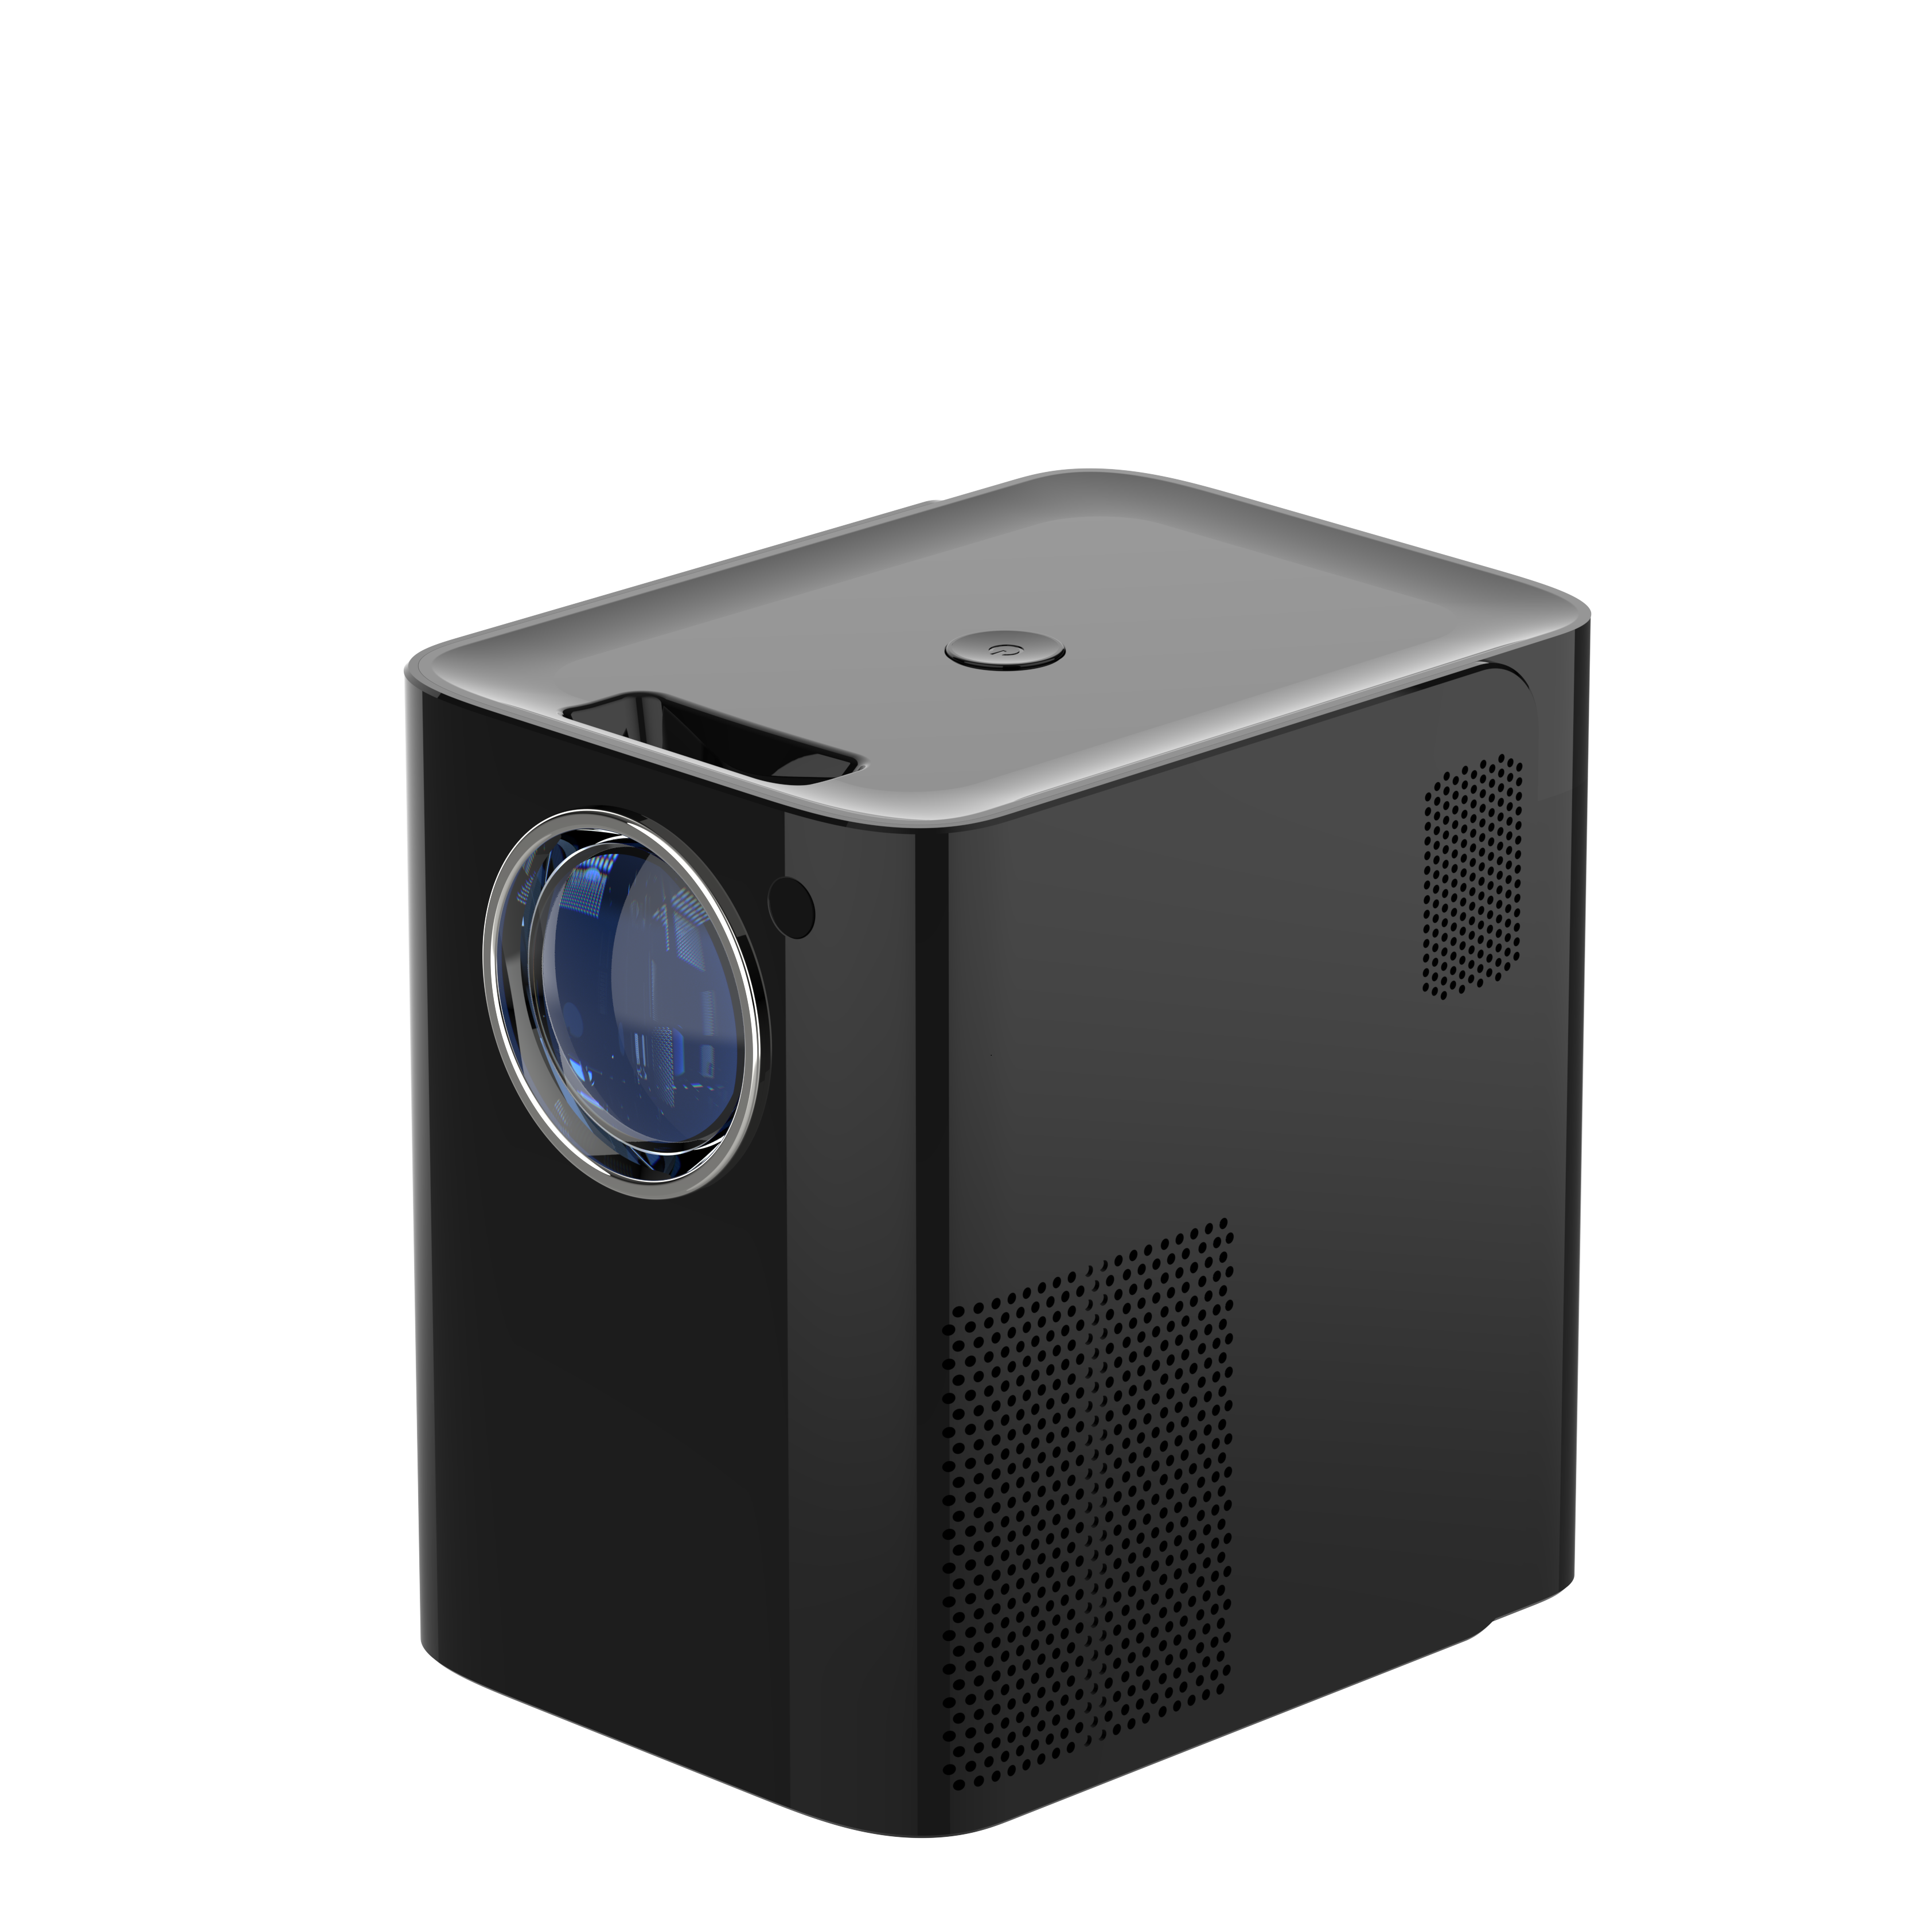 IMC588 FHD Android Projector